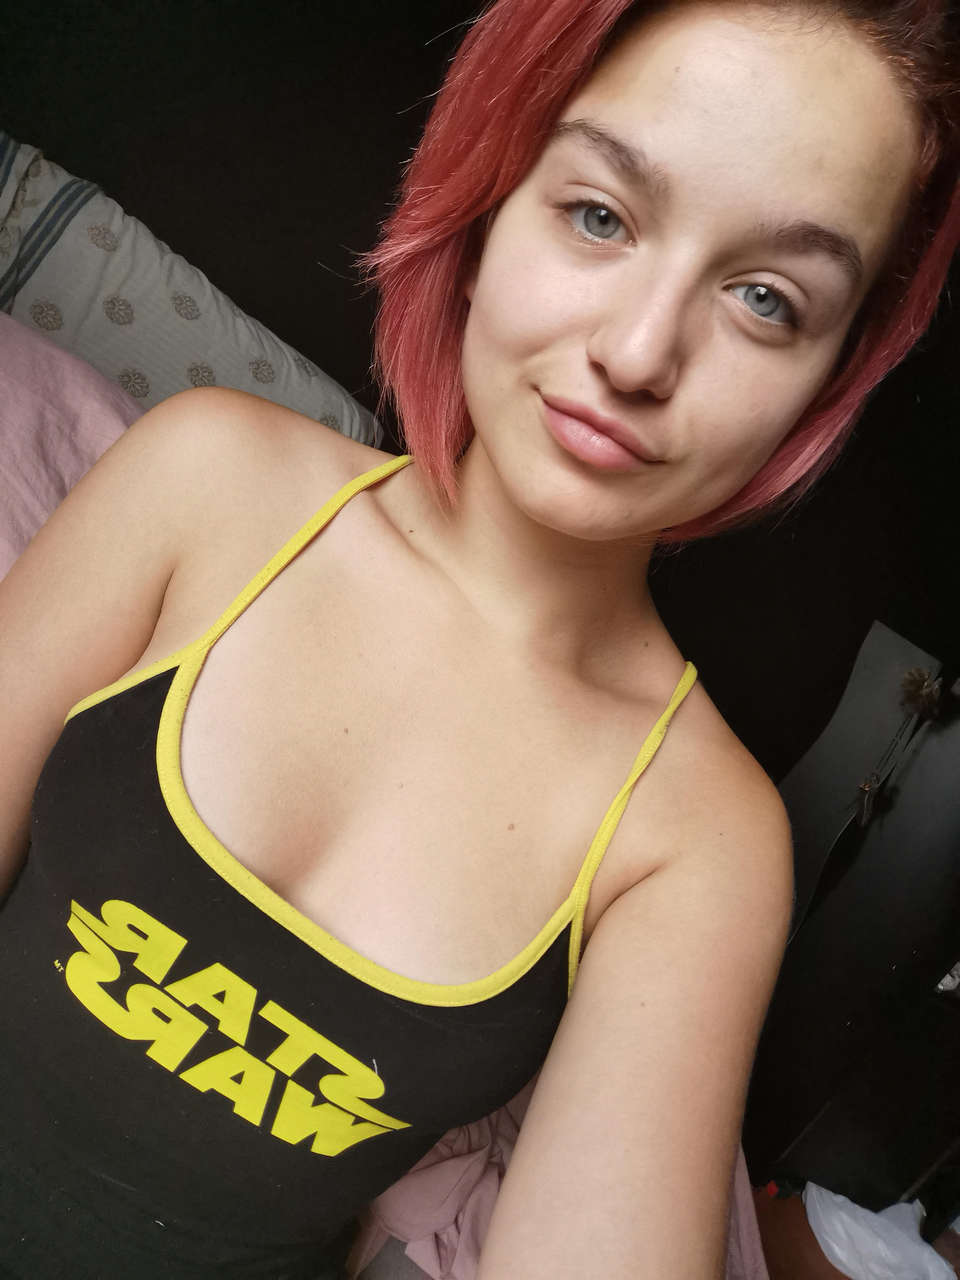 Saw A Selfie Of Jenette Mccurdy In Her Star Wars T Shirt Here Though Id Share Min